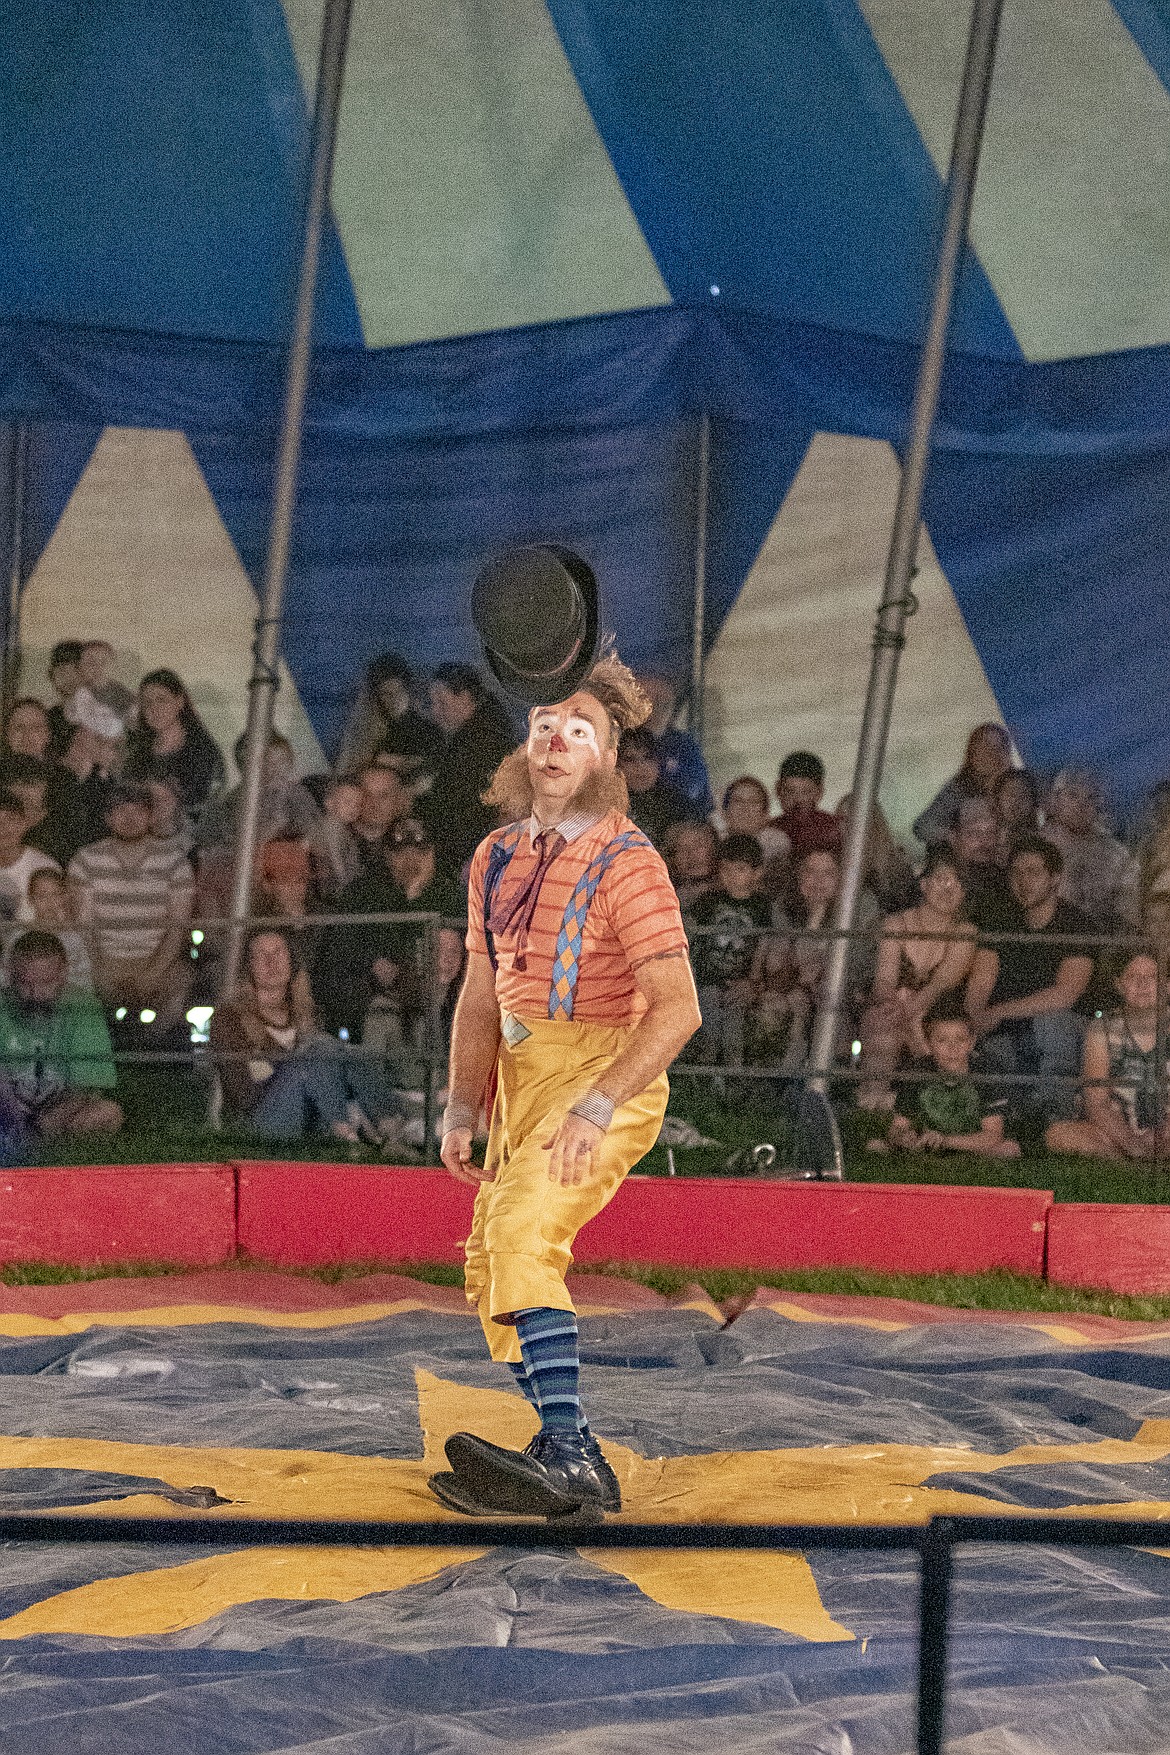 Leo the Clown entertains the crowd at the first performance of the Culpepper & Merriweather Circus in Ronan on Saturday afternoon.